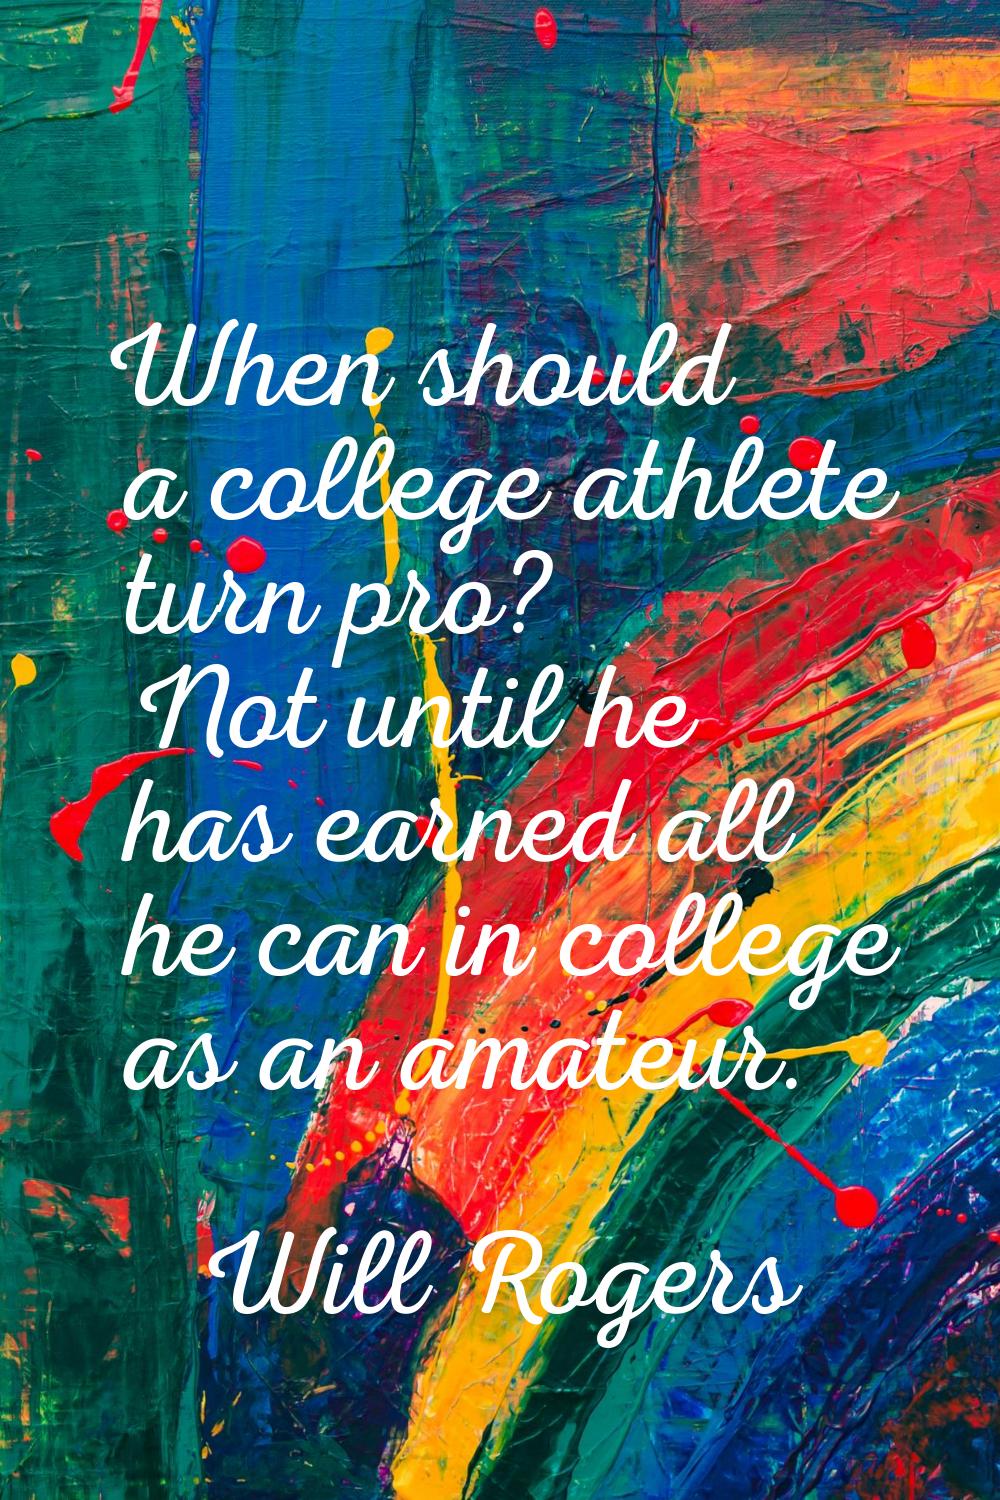 When should a college athlete turn pro? Not until he has earned all he can in college as an amateur